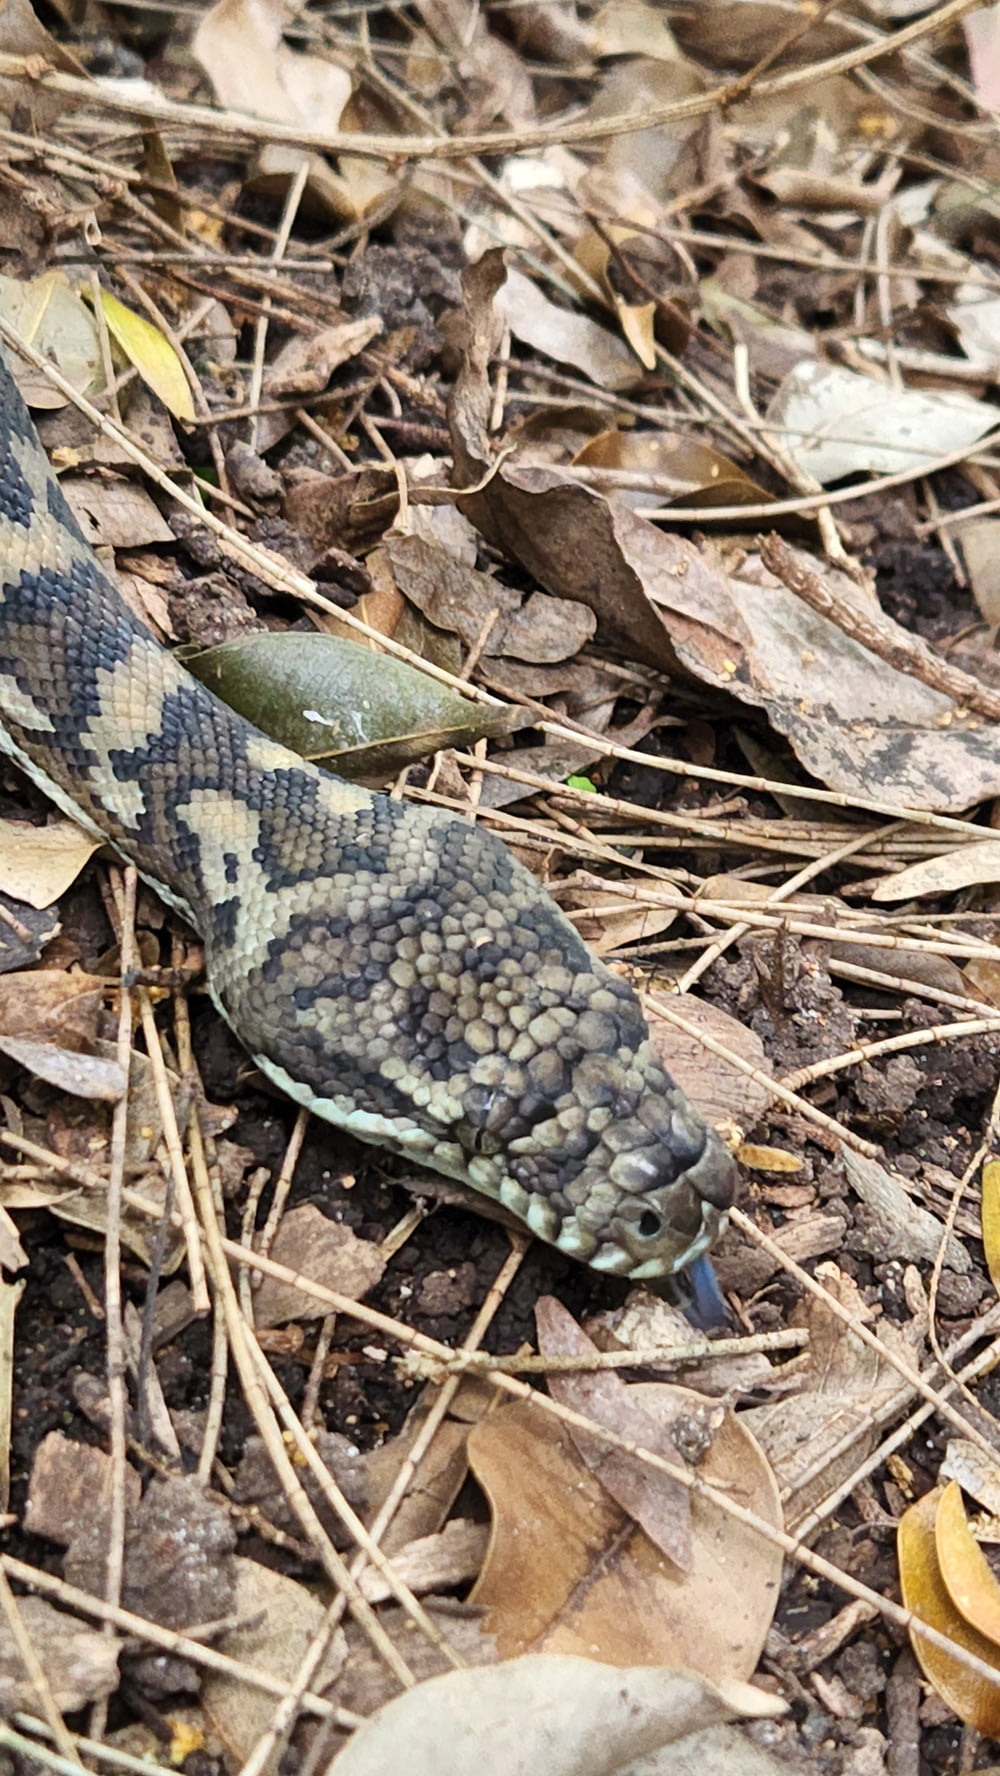 a snake on the ground